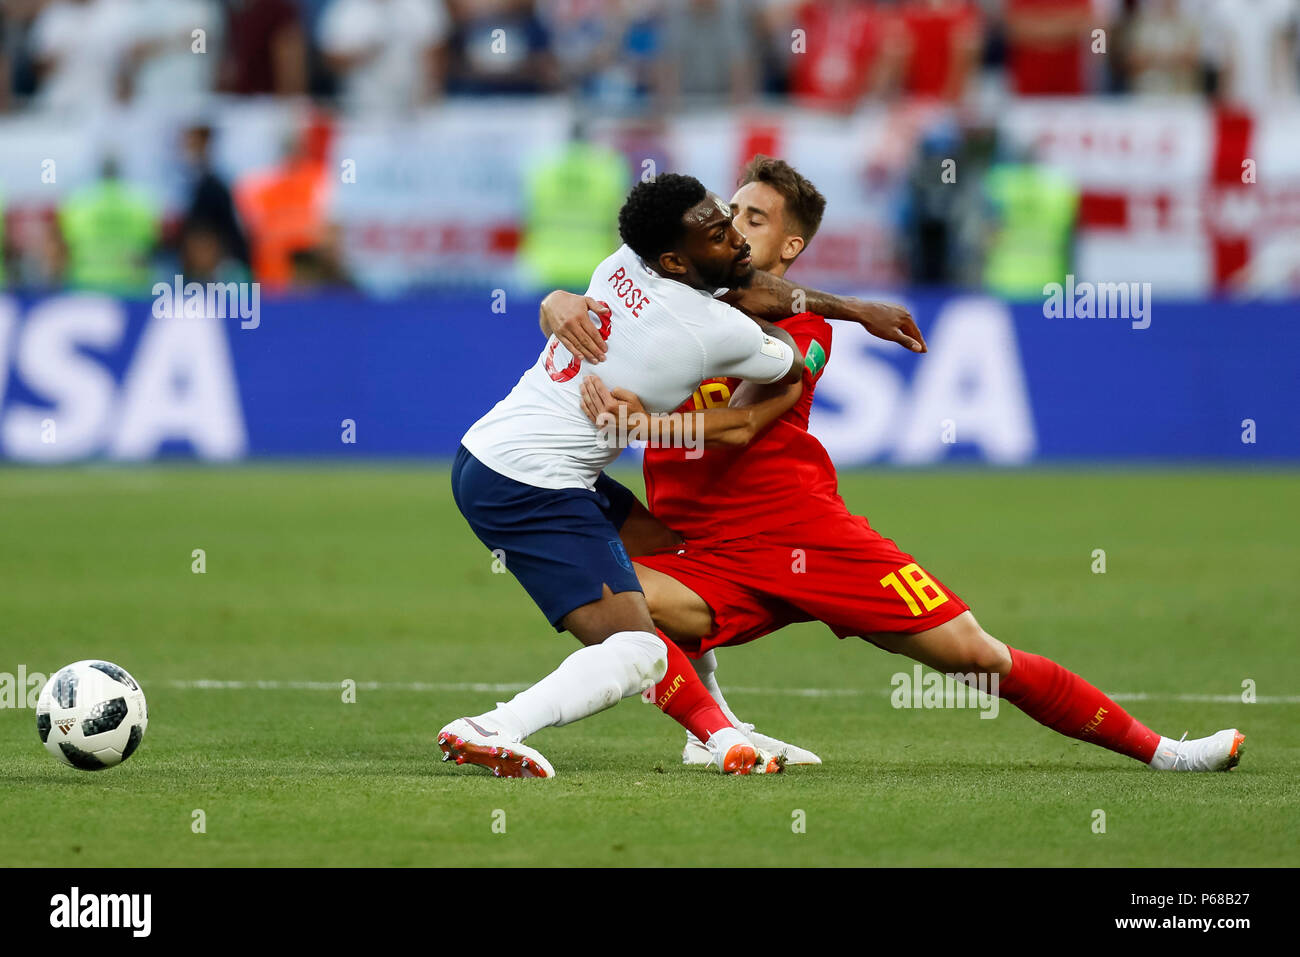 Kaliningrad, Russia. 28th June, 2018. Danny Rose of England and Adnan Januzaj of Belgium during the 2018 FIFA World Cup Group G match between England and Belgium at Kaliningrad Stadium on June 28th 2018 in Kaliningrad, Russia. (Photo by Daniel Chesterton/phcimages.com) Credit: PHC Images/Alamy Live News Stock Photo